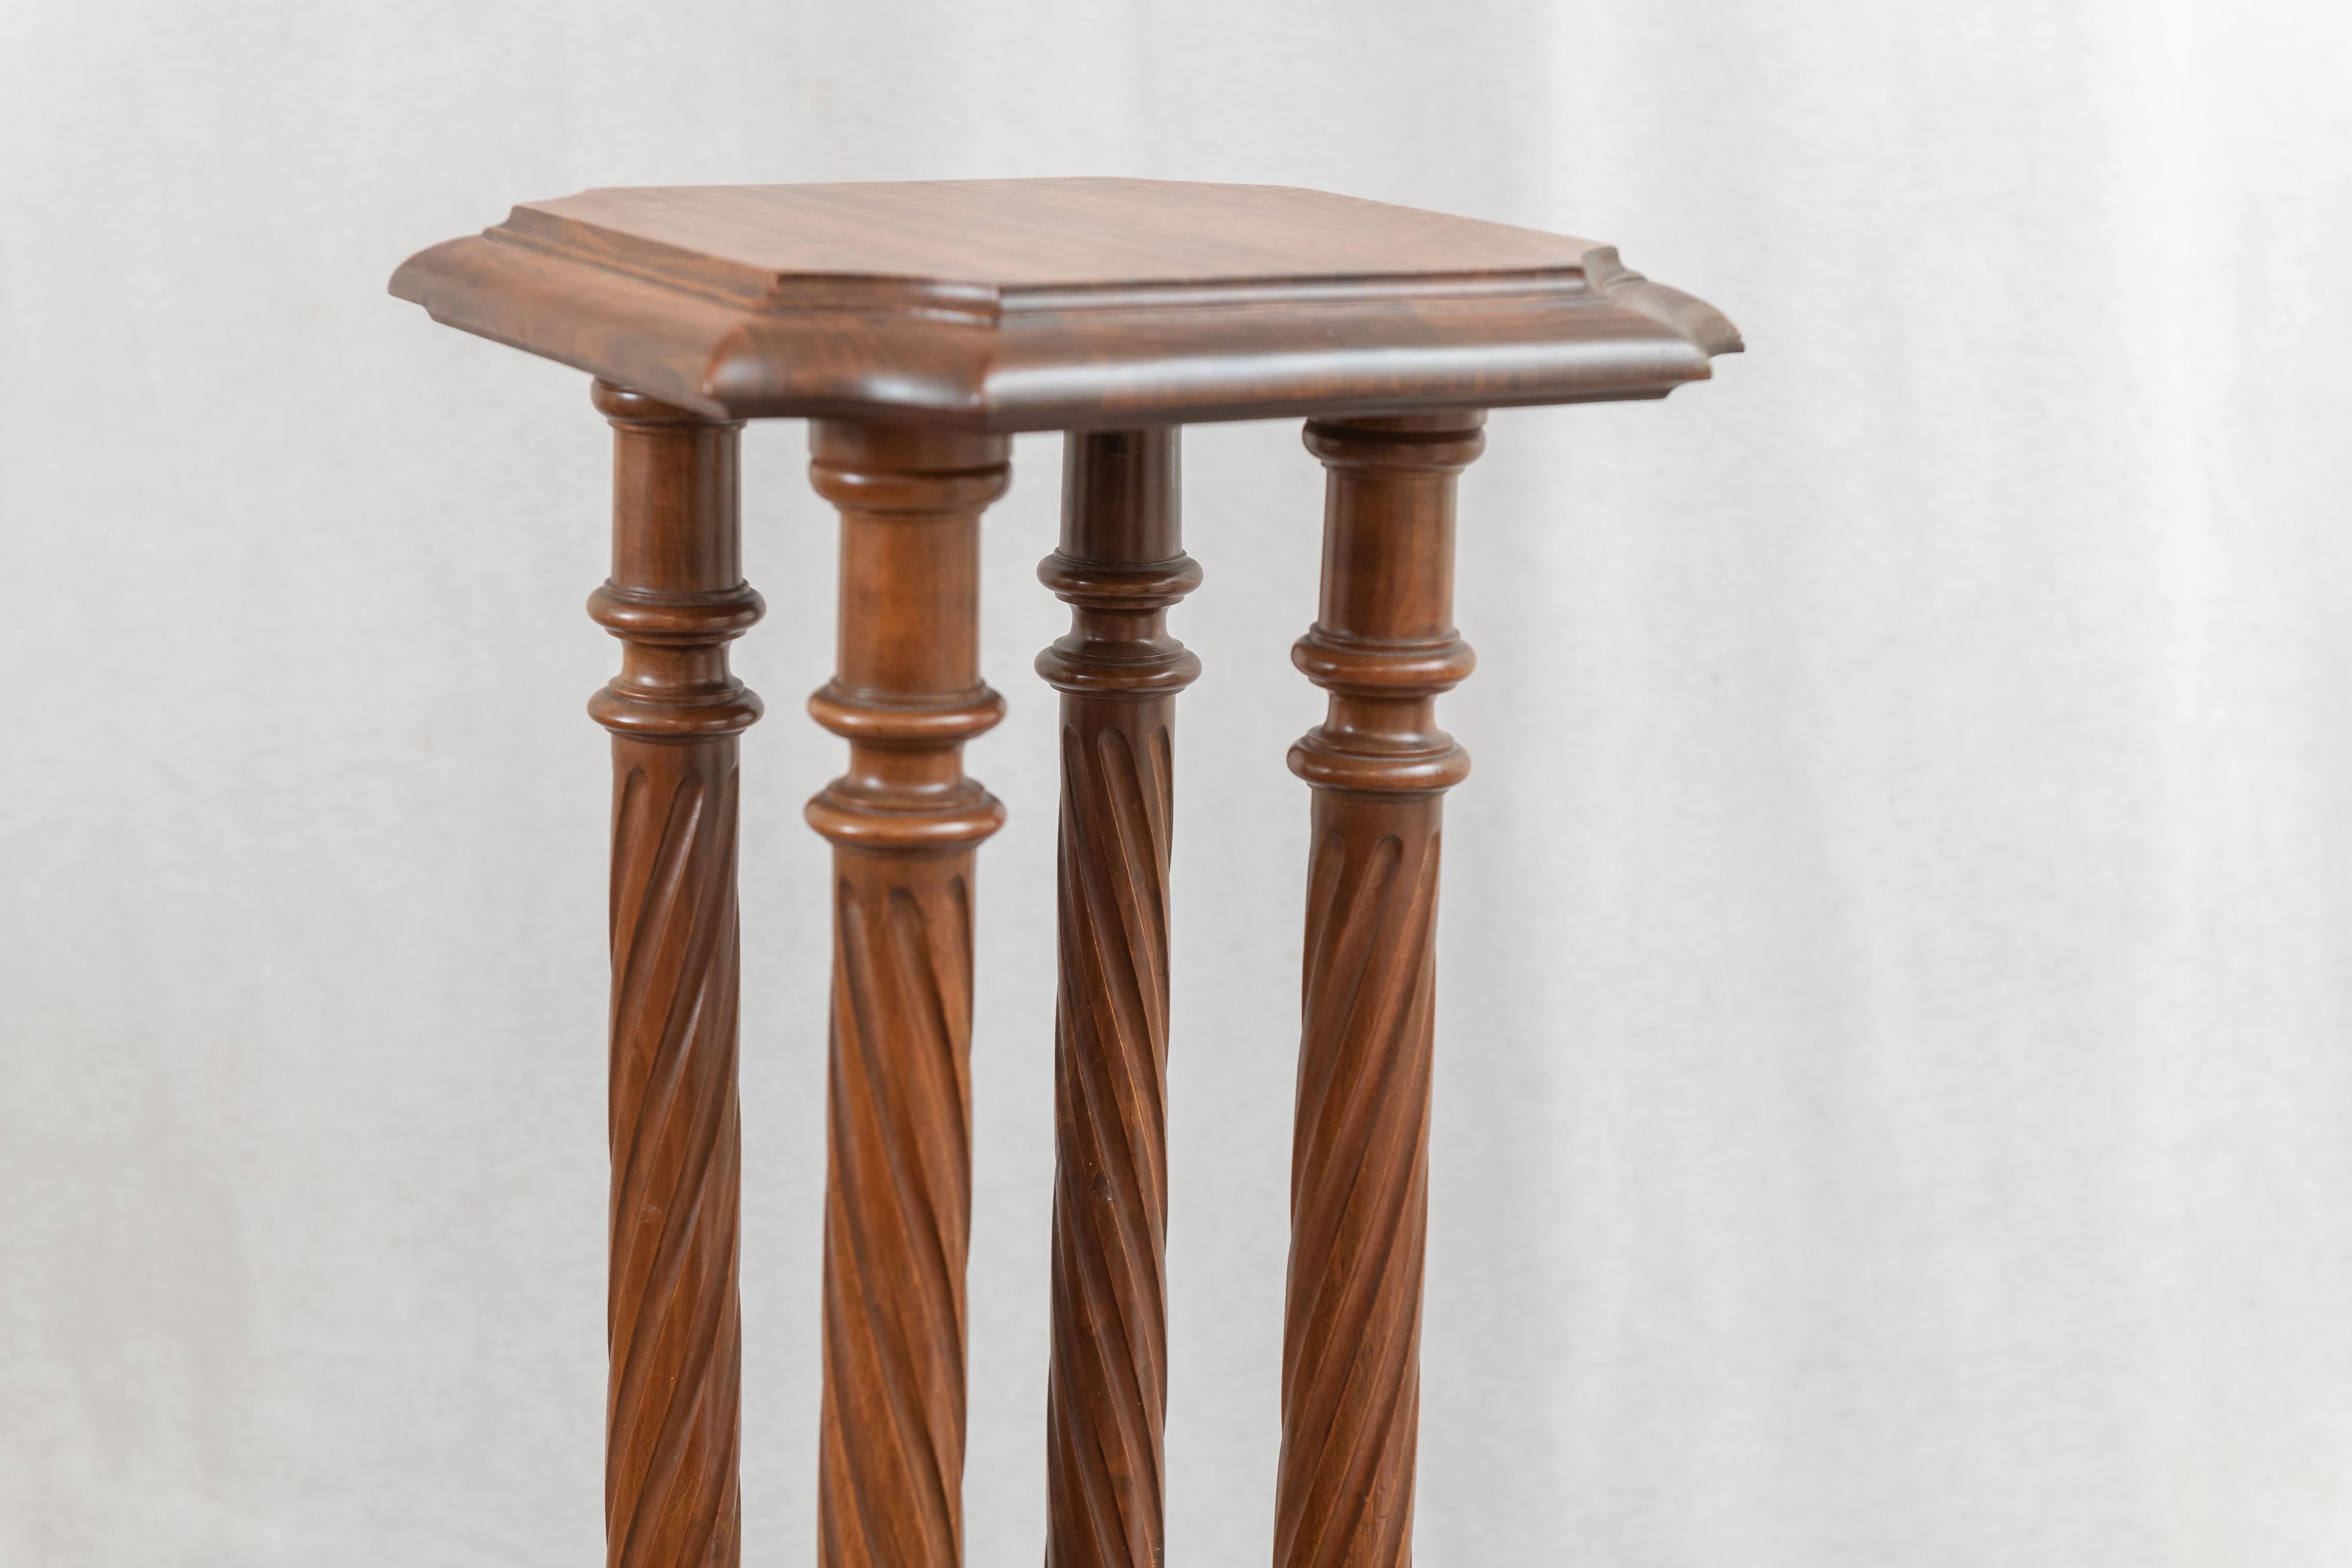 This unusual pedestal has 4 barley twist columns leading up a top which has 4 curved corners. The center of the top is raised and cut back, and adds interest to its look. The base is substantial and works well with the overall look. 
 We have listed